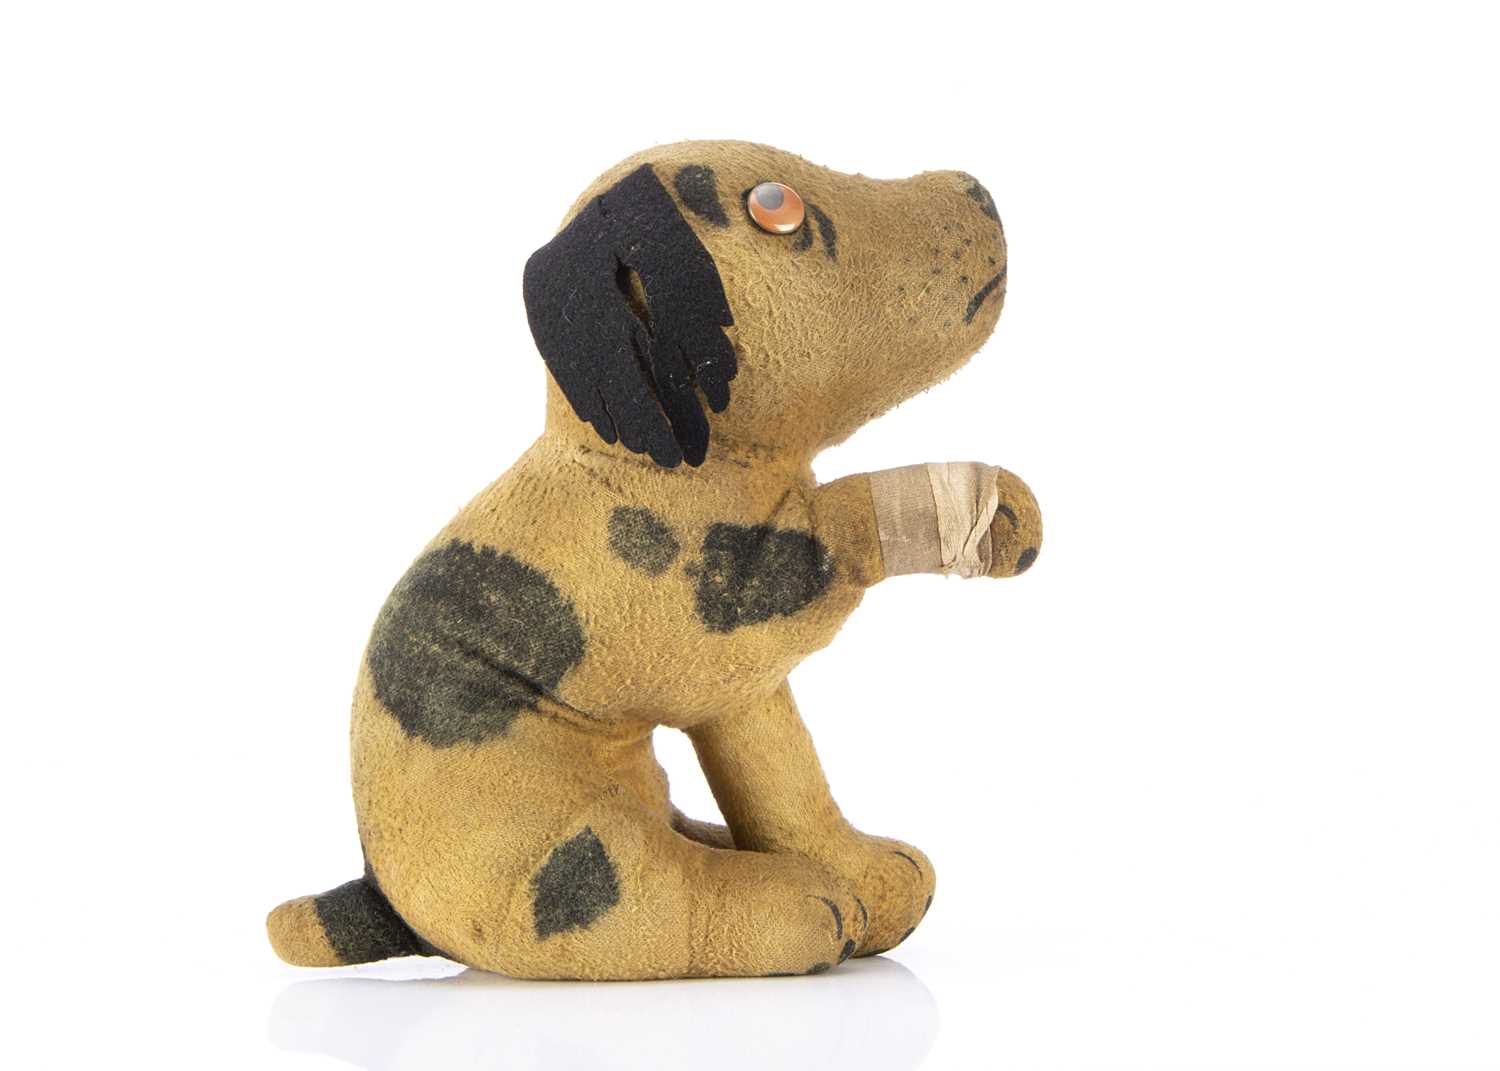 Lot 112 - A Dean’s Rag Book Co Tatters the Hospital Pup circa 1928